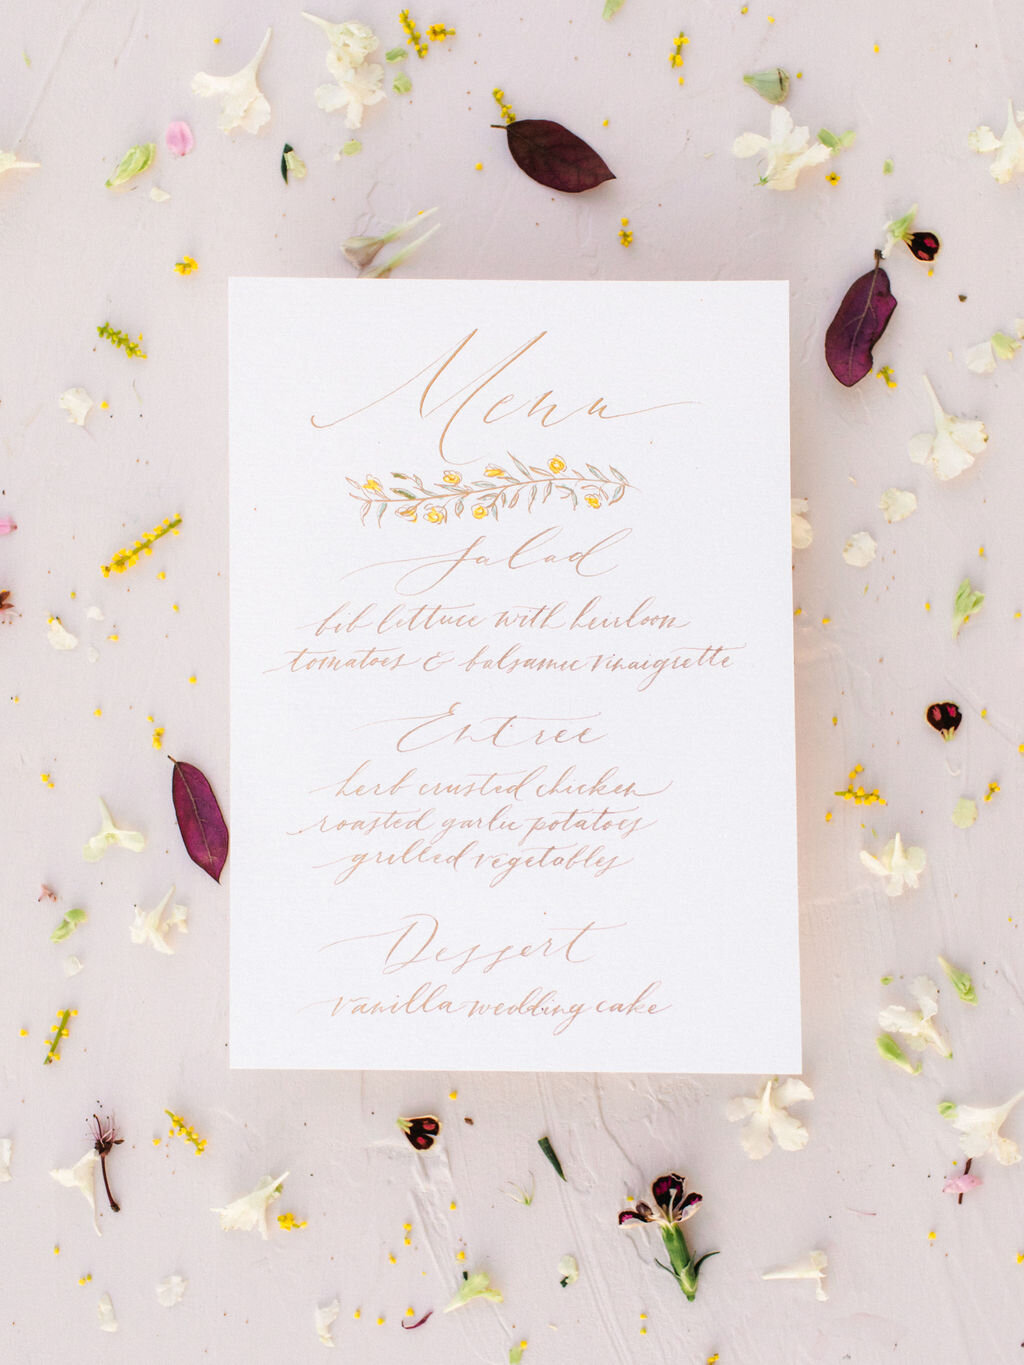 Calligraphy menu with gold text &amp; outline flower designs with filled in yellow